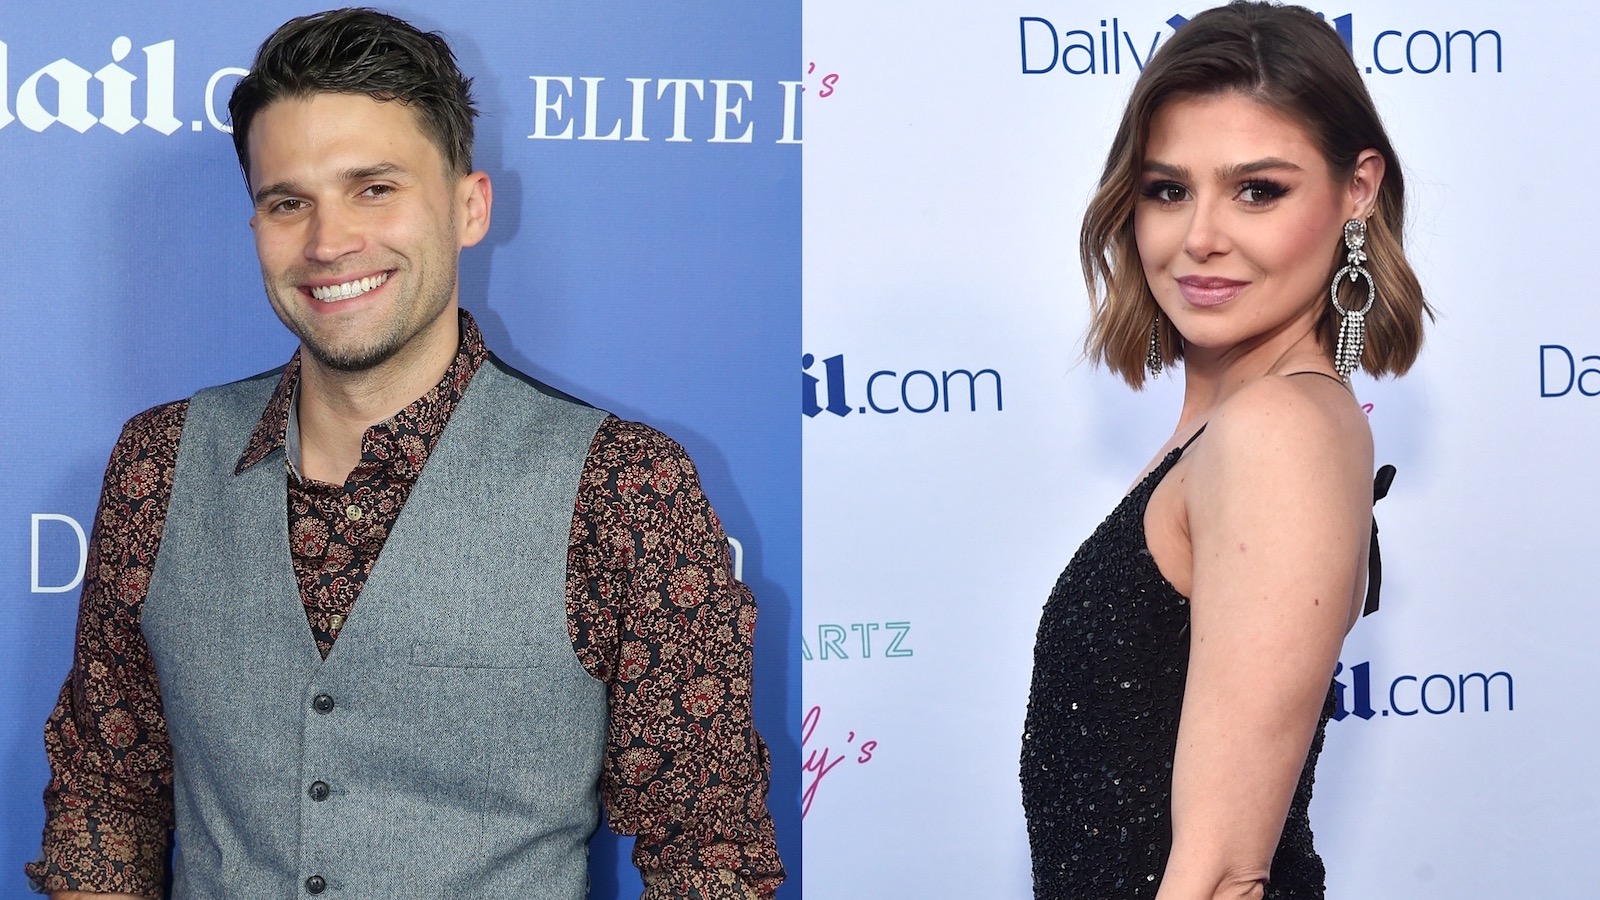 Are Tom Schwartz and Raquel Leviss from 'Vanderpump Rules' dating...